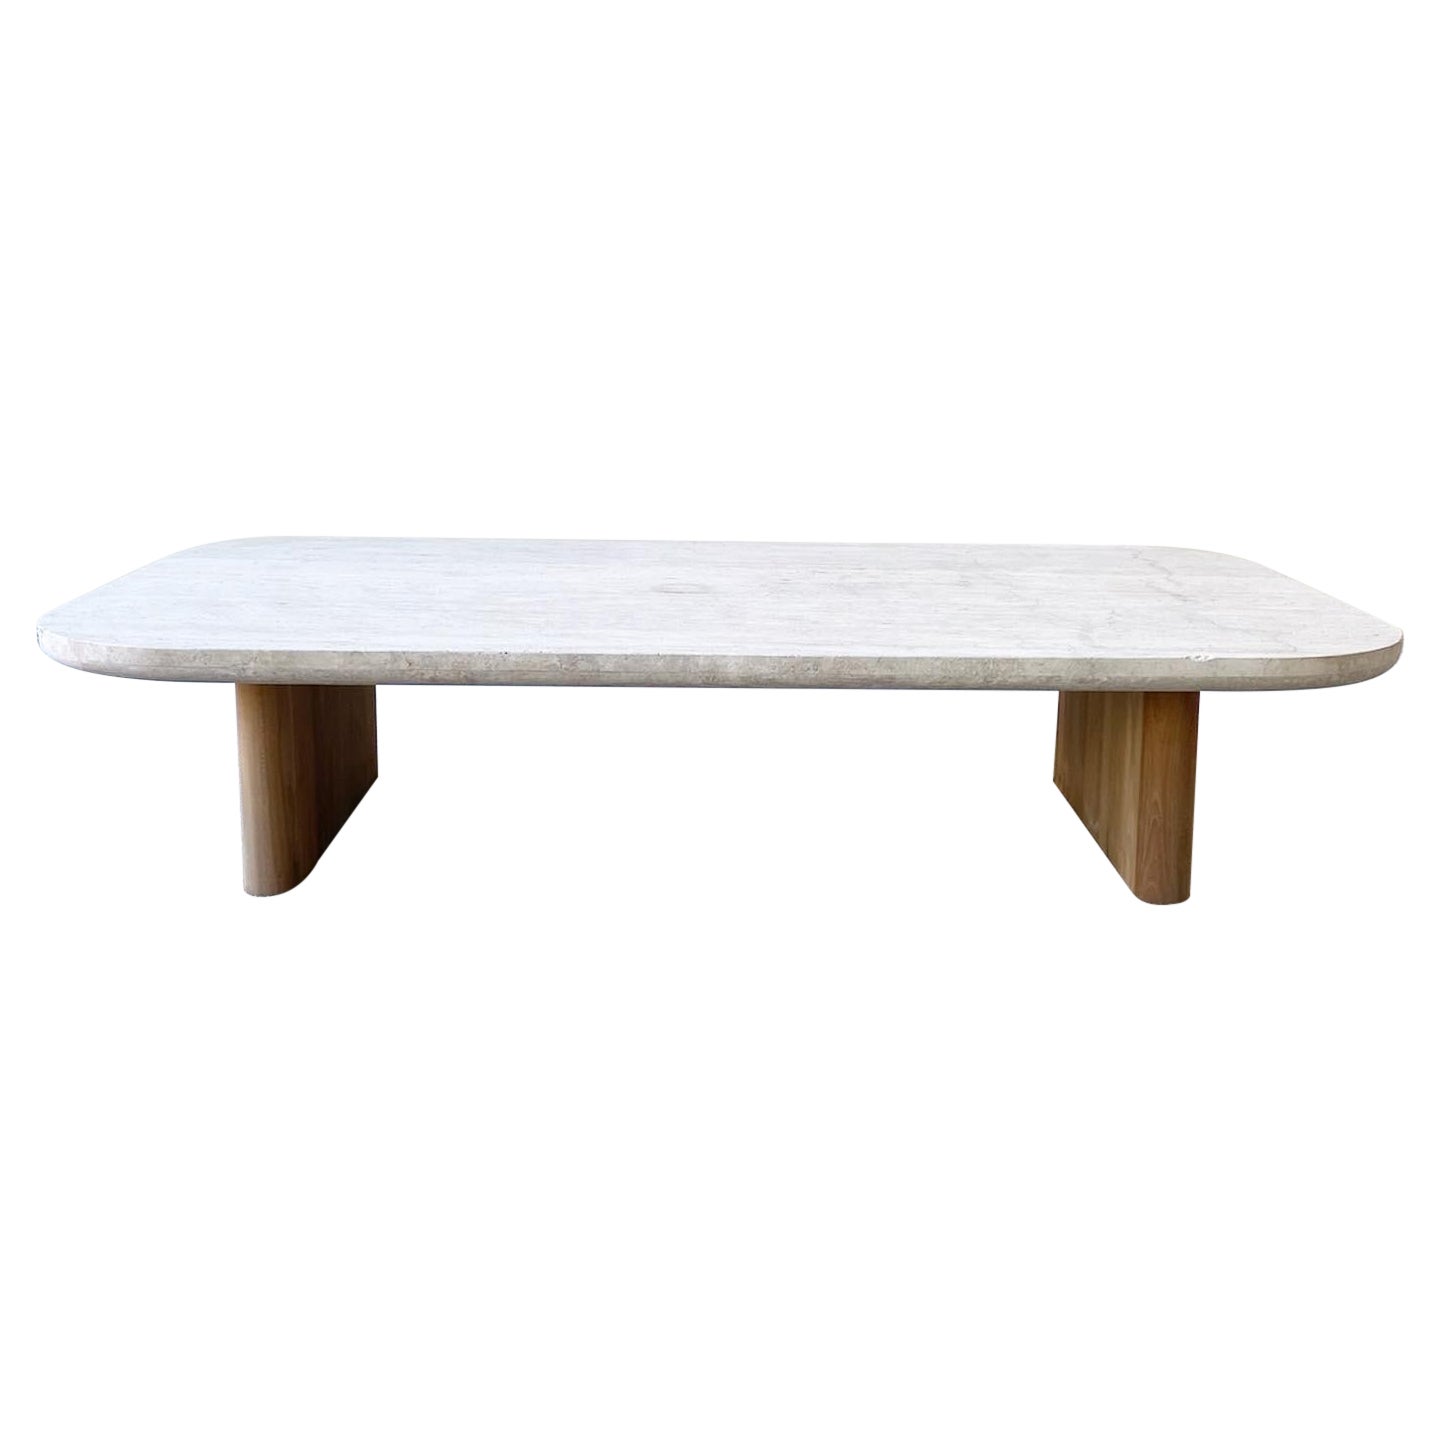 Victoria Teak Coffee Table with Travertine Top by Harbour